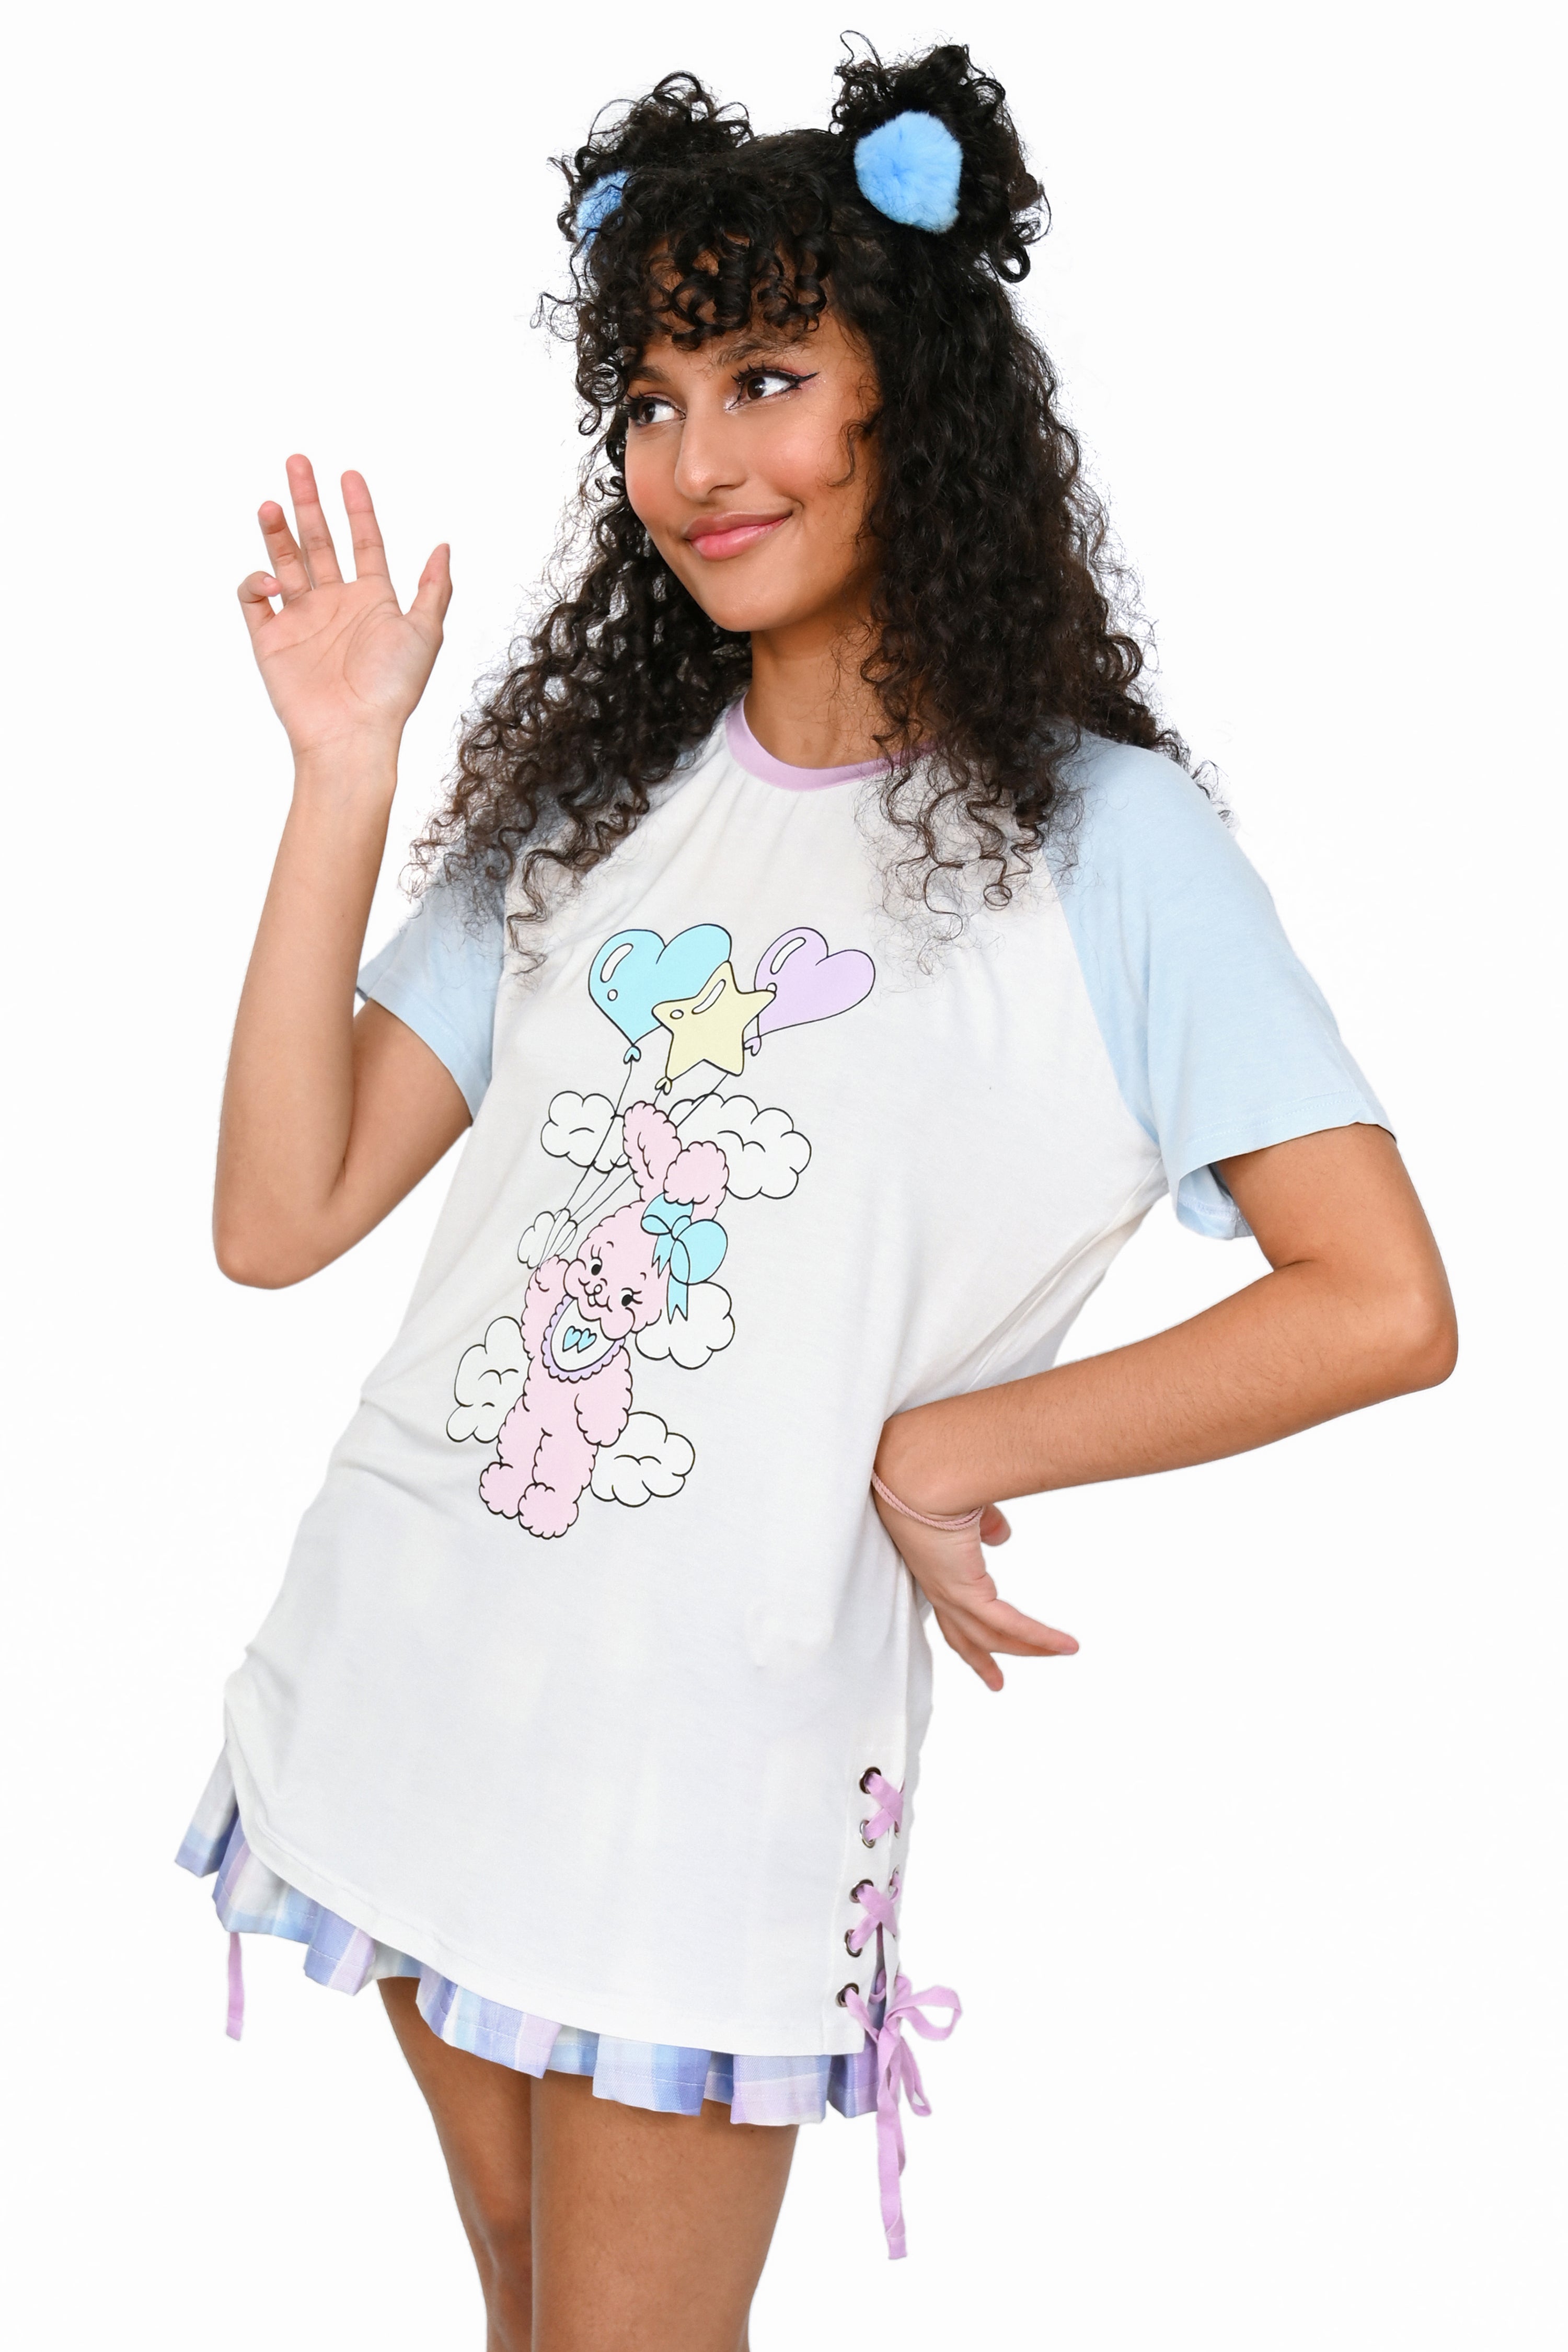 White raglan tee with sky blue sleeves, featuring a graphic with  pink bunny holding balloons